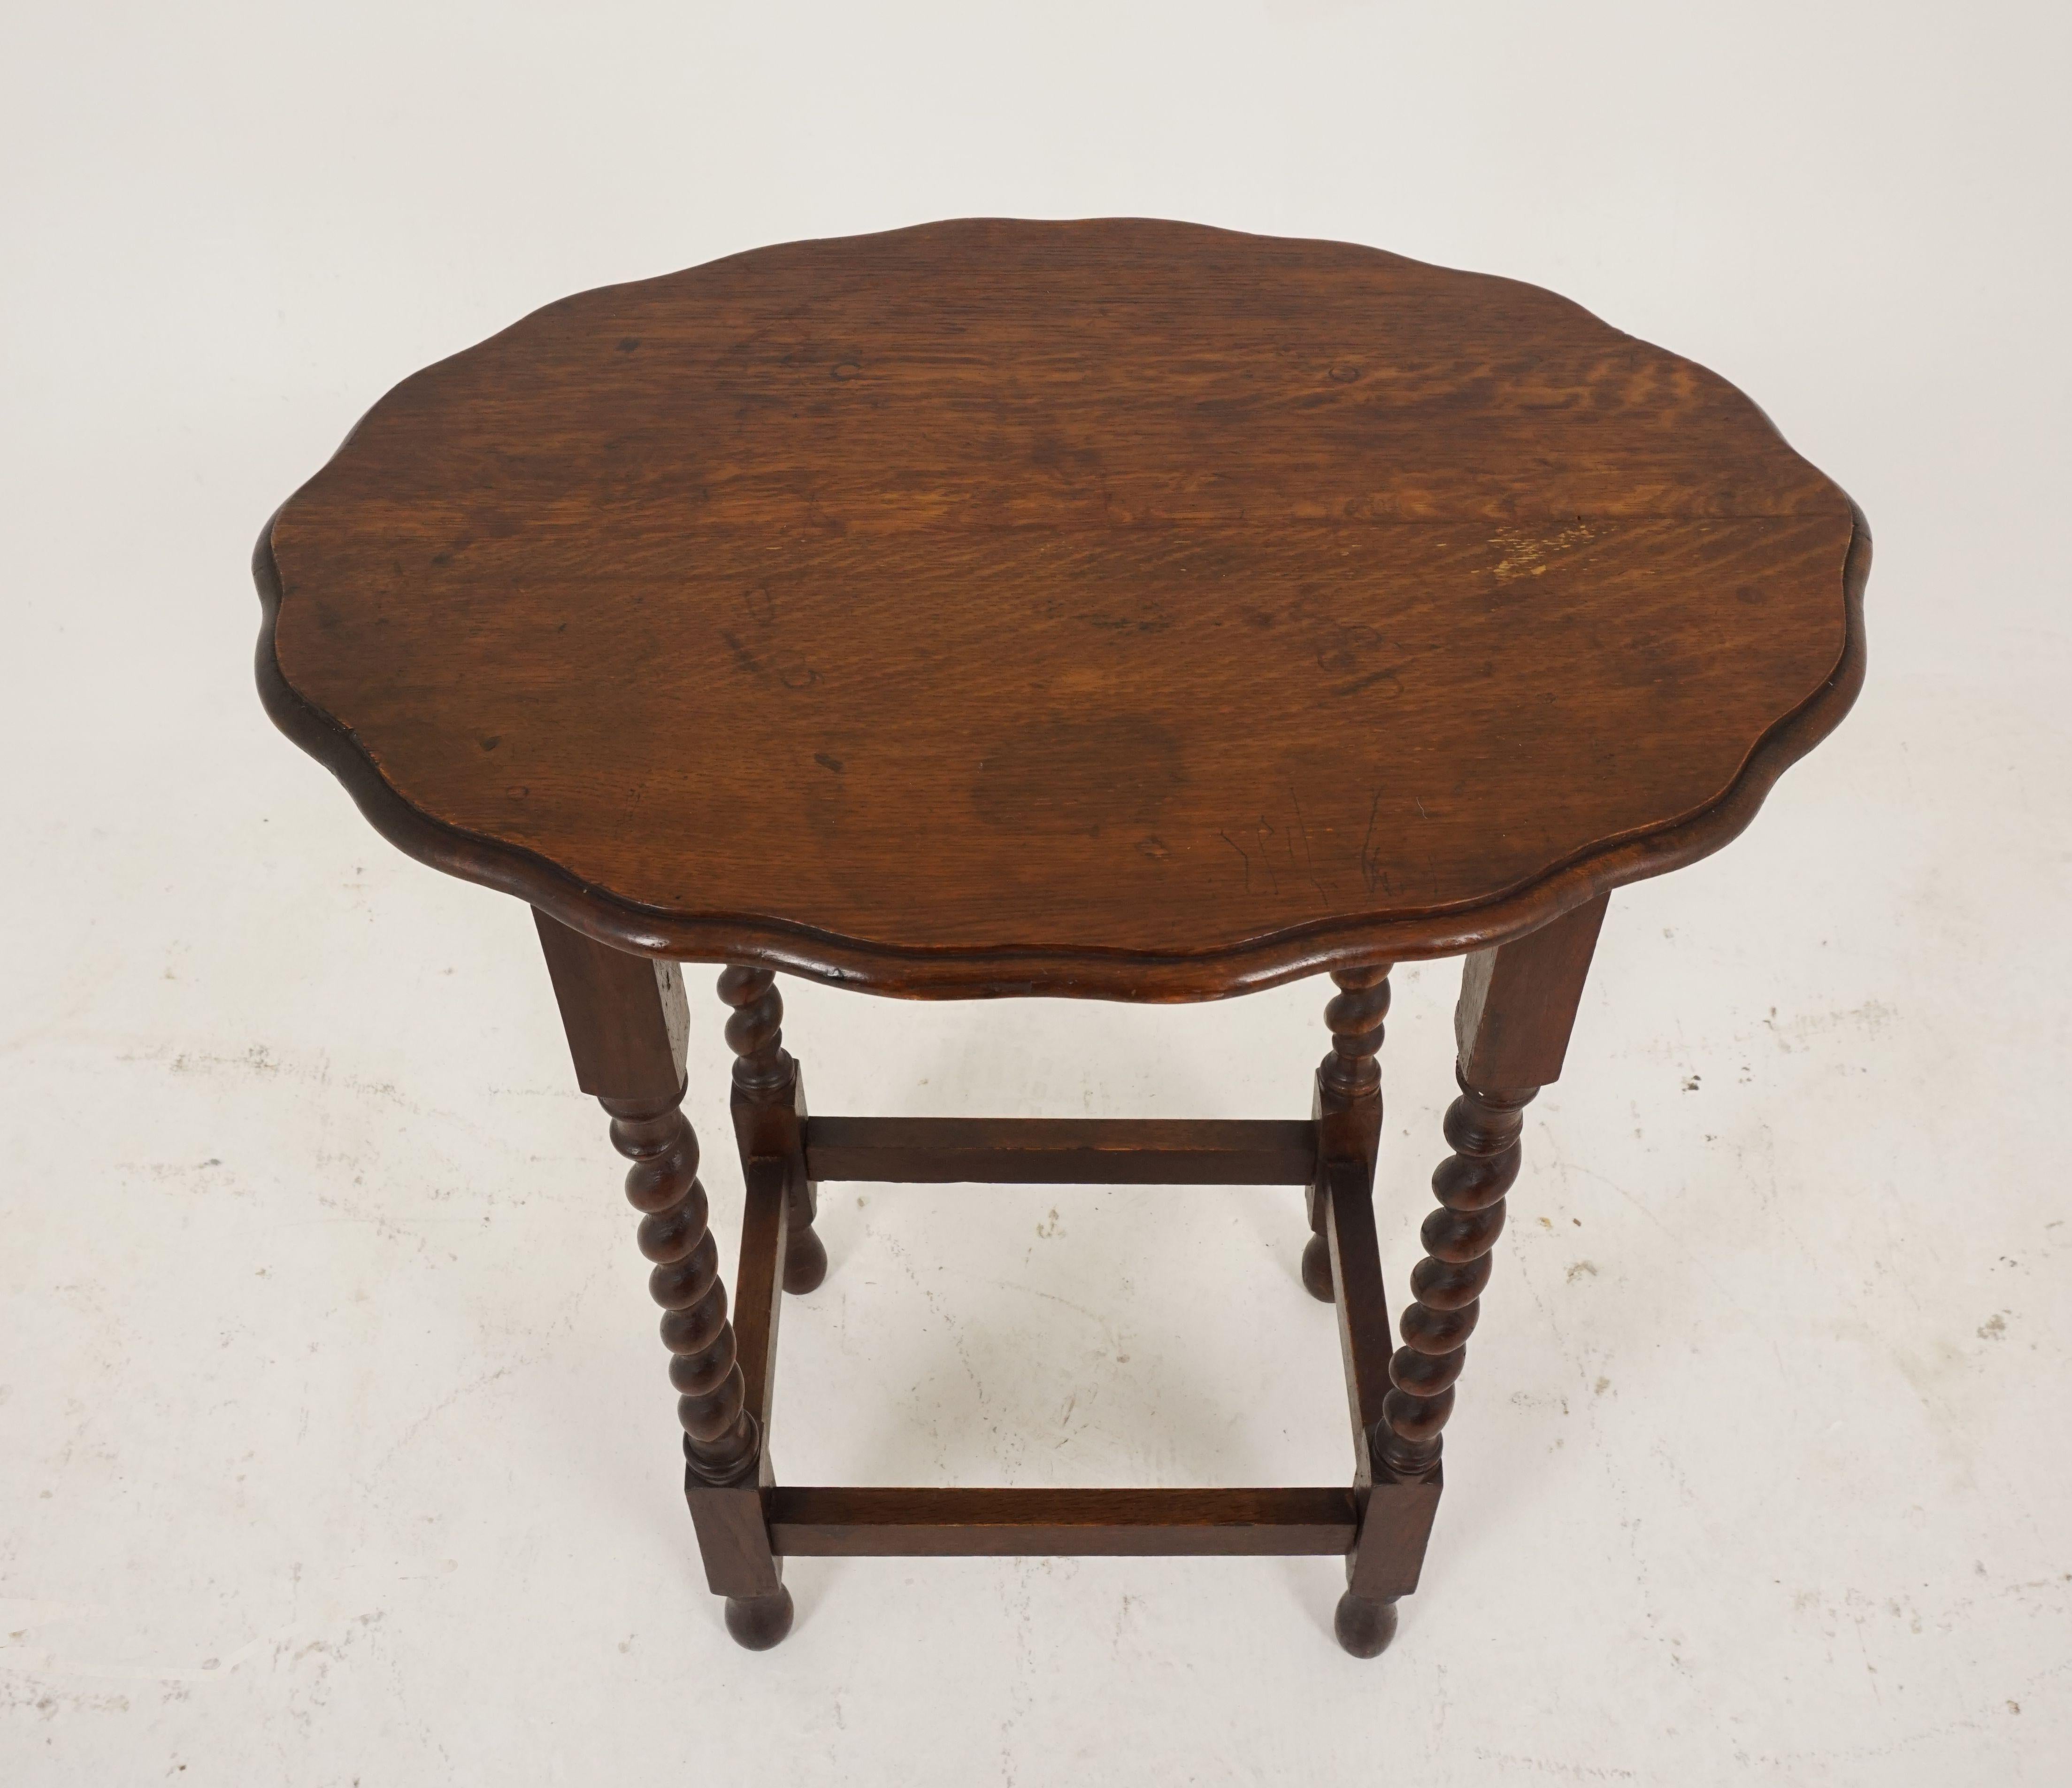 Vintage barley twist oak oval lamp table, Scotland 1930, B2215

Scotland, 1930
solid oak
Original finish
Oval shaped top with a pie crust edge
Standing four barley twist legs
All connected by stretchers
All joints are tight
Some wear to the